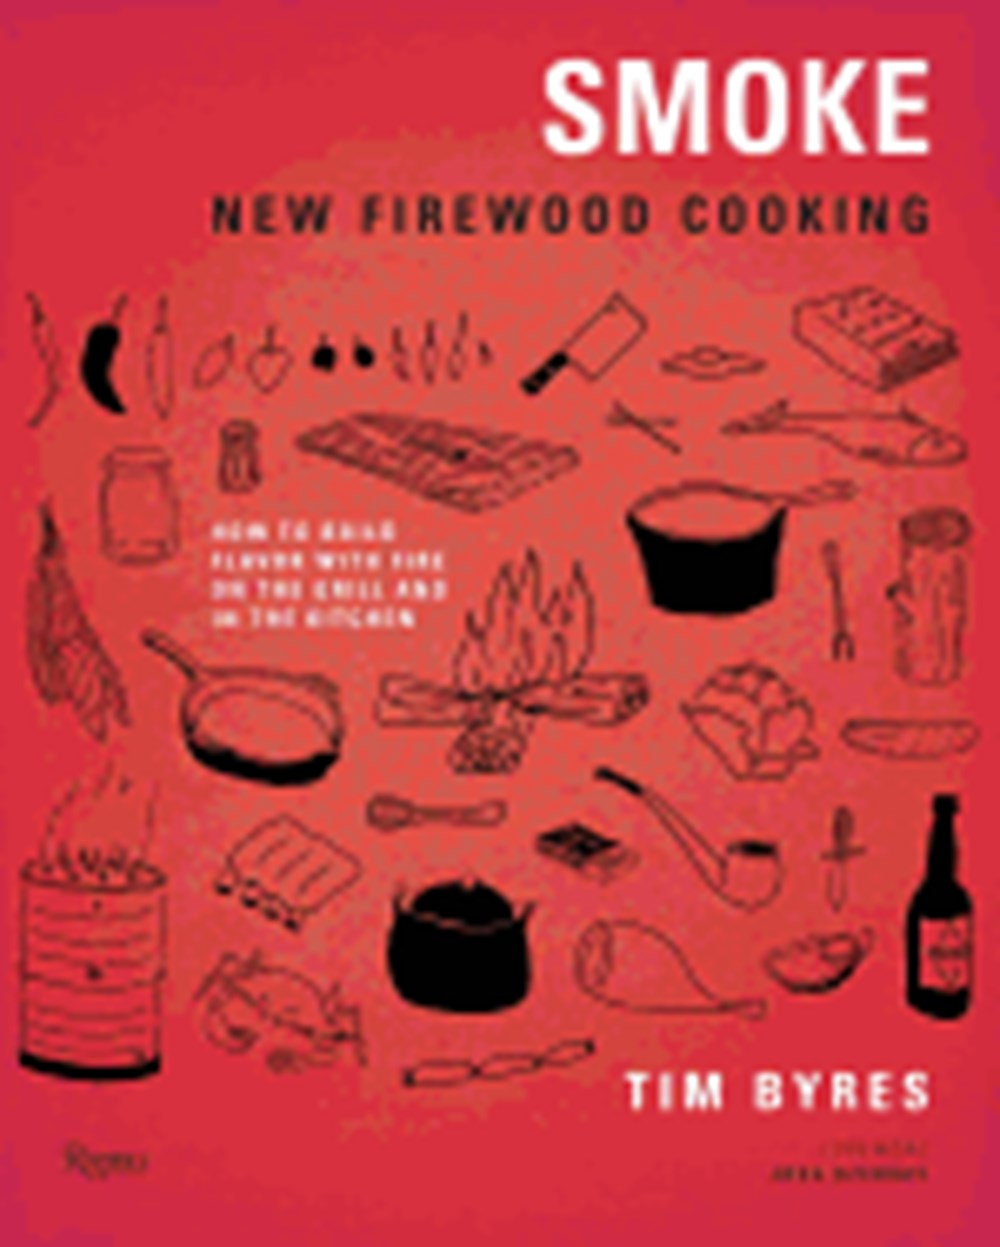 Smoke: New Firewood Cooking: How to Build Flavor with Fire on the Grill and in the Kitchen